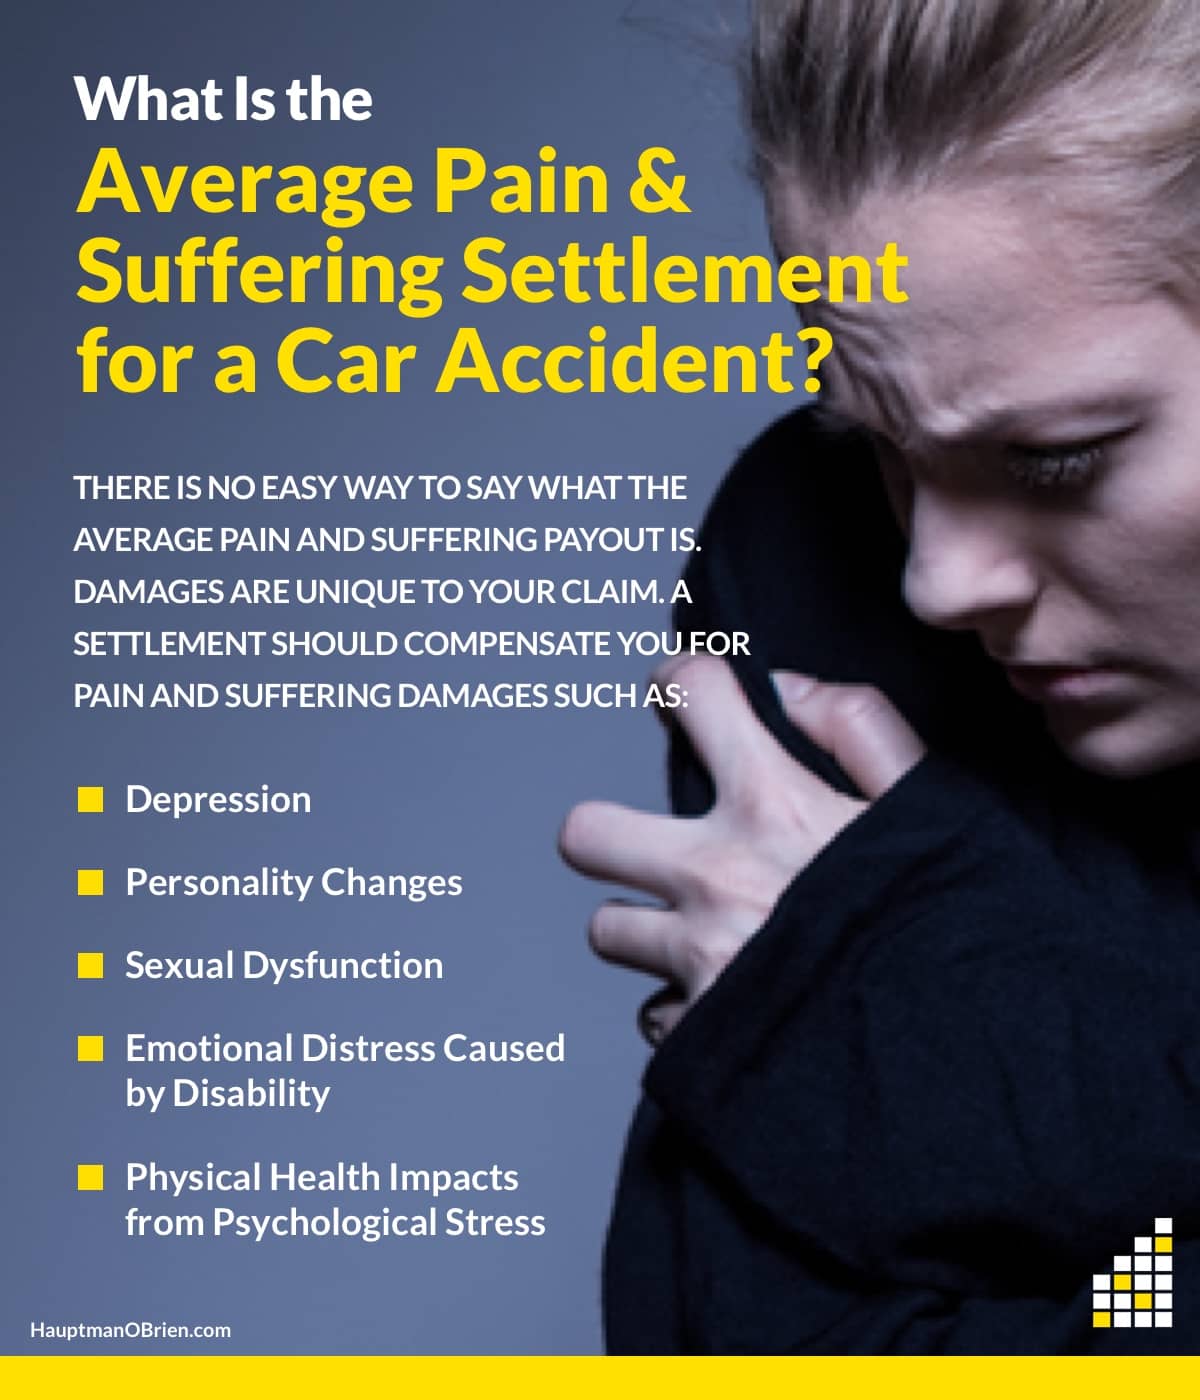 Car Accident Pain and Suffering Damages | Hauptman, O'Brien, Wolf and Lathrop